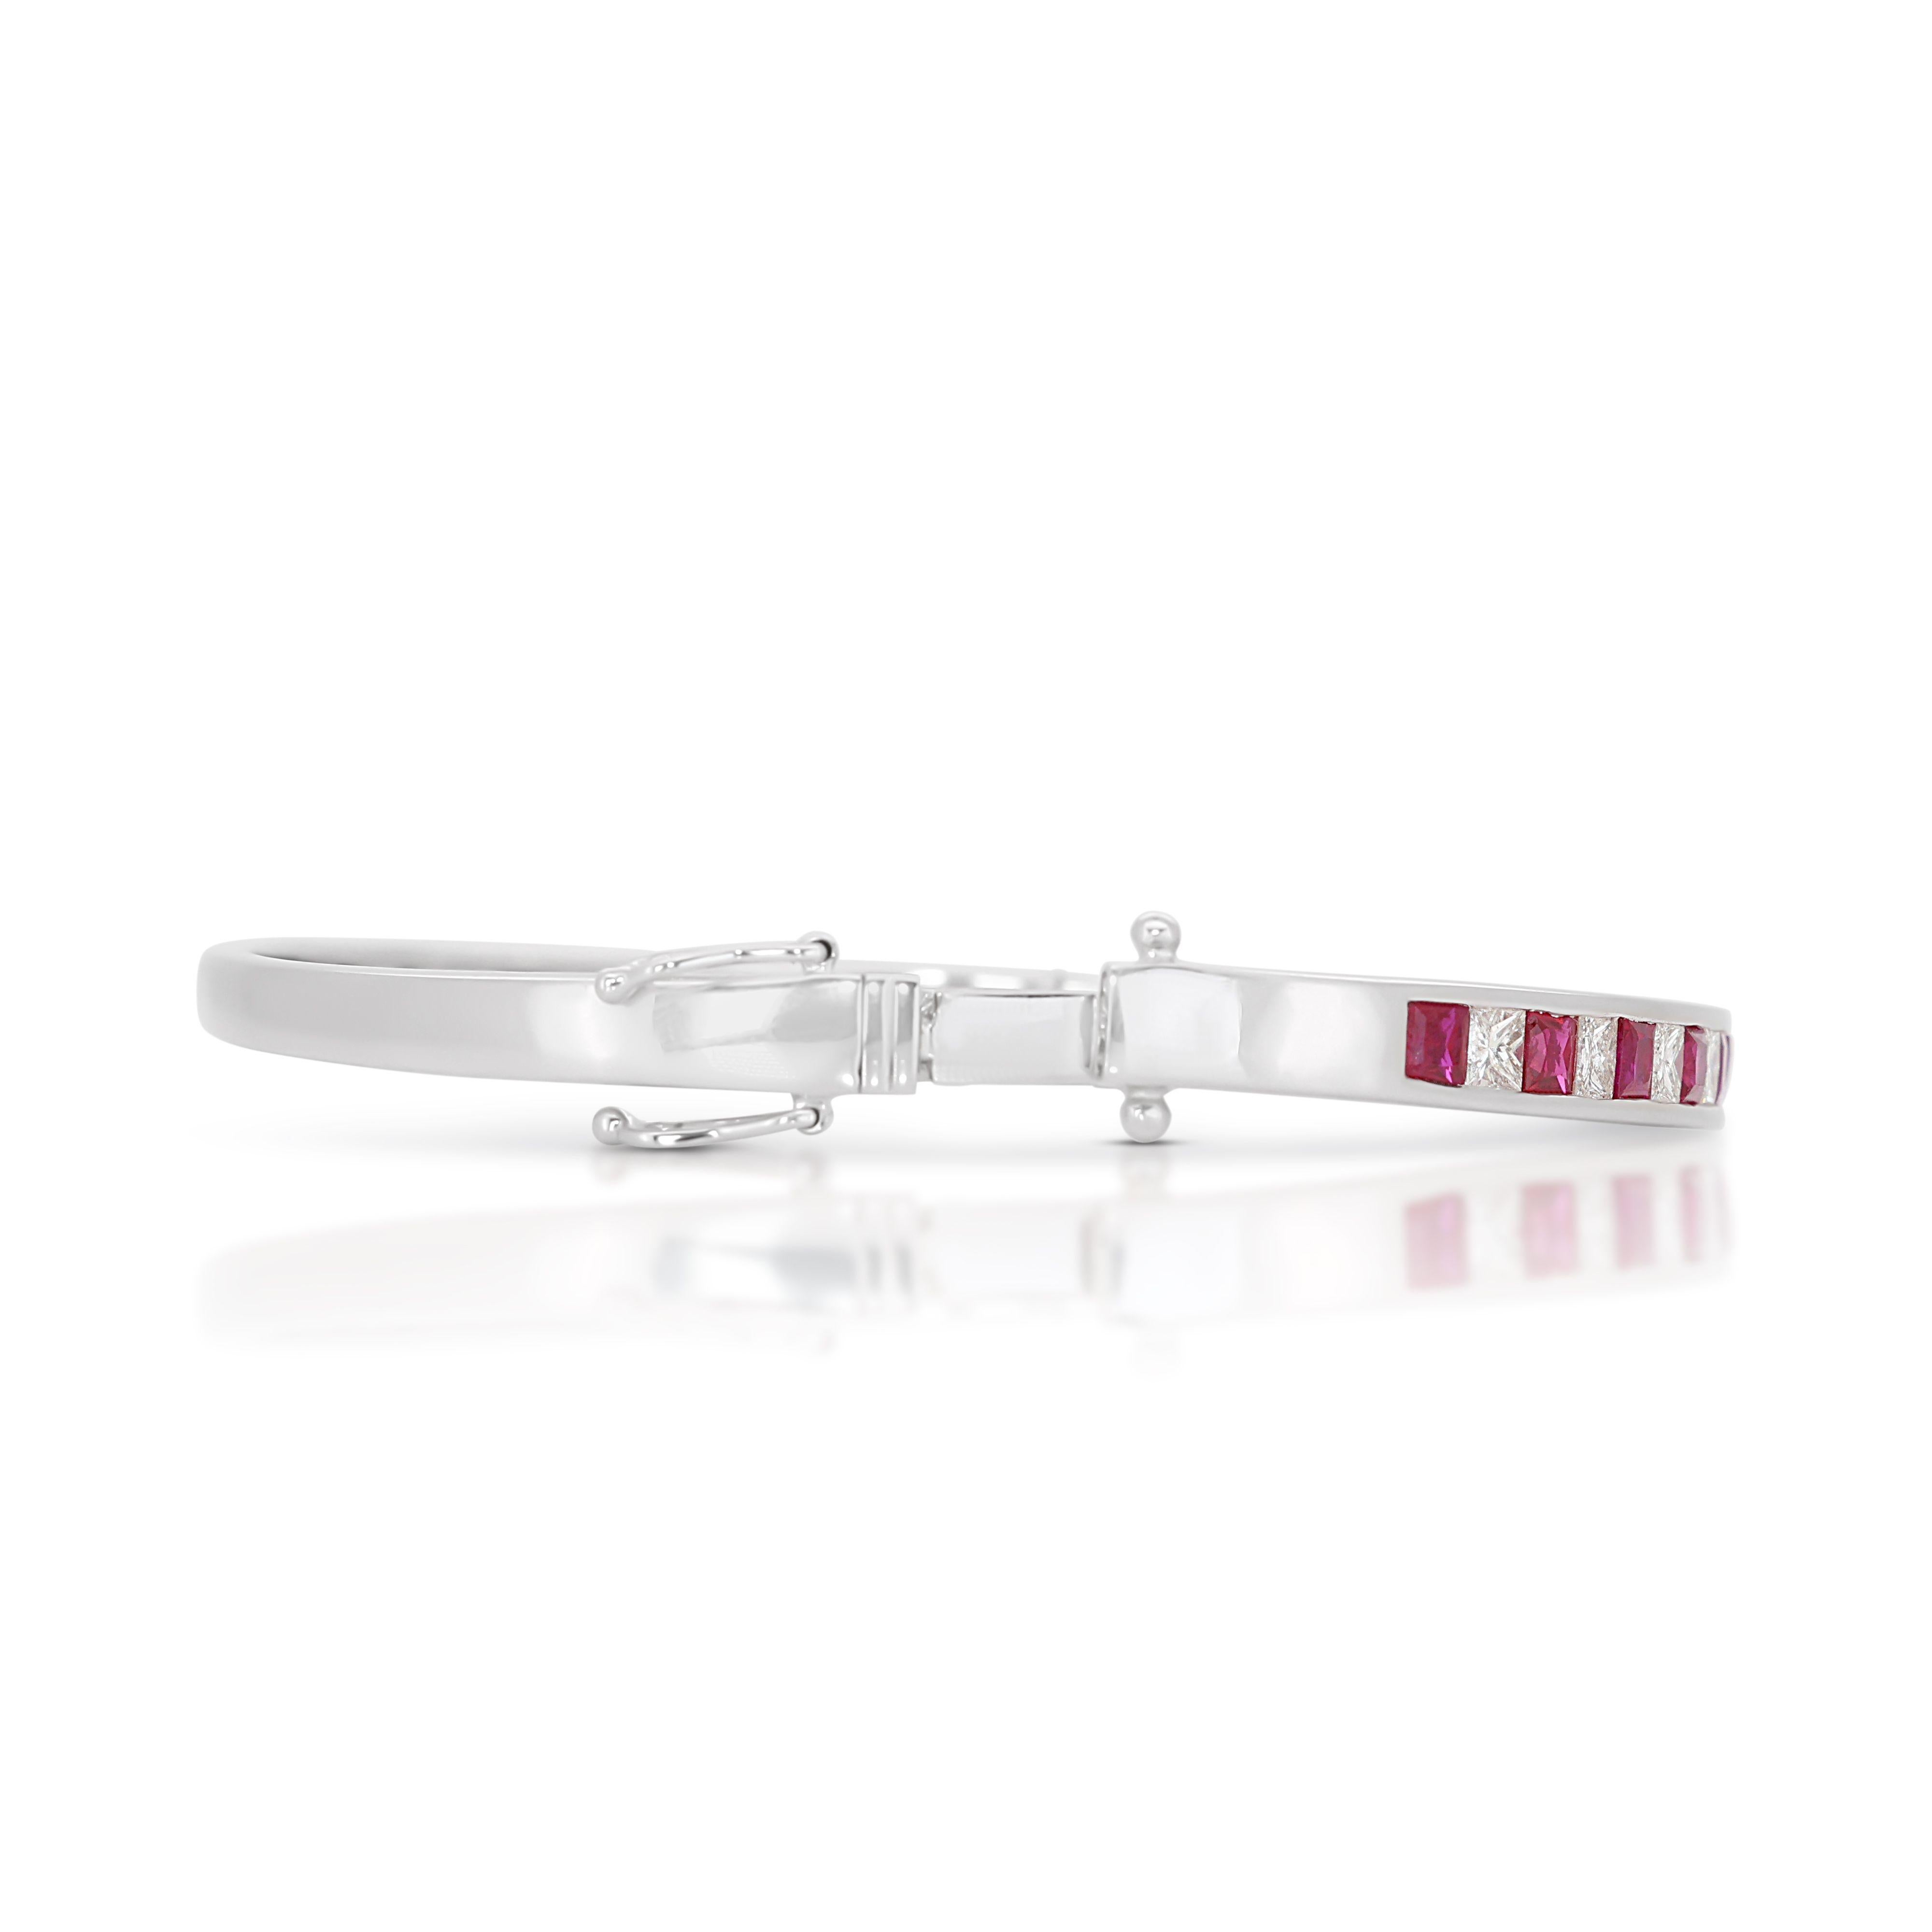 Dazzling 18k White Gold Bangle w/ 4ct Natural Rubies and Diamonds NGI Cert For Sale 3